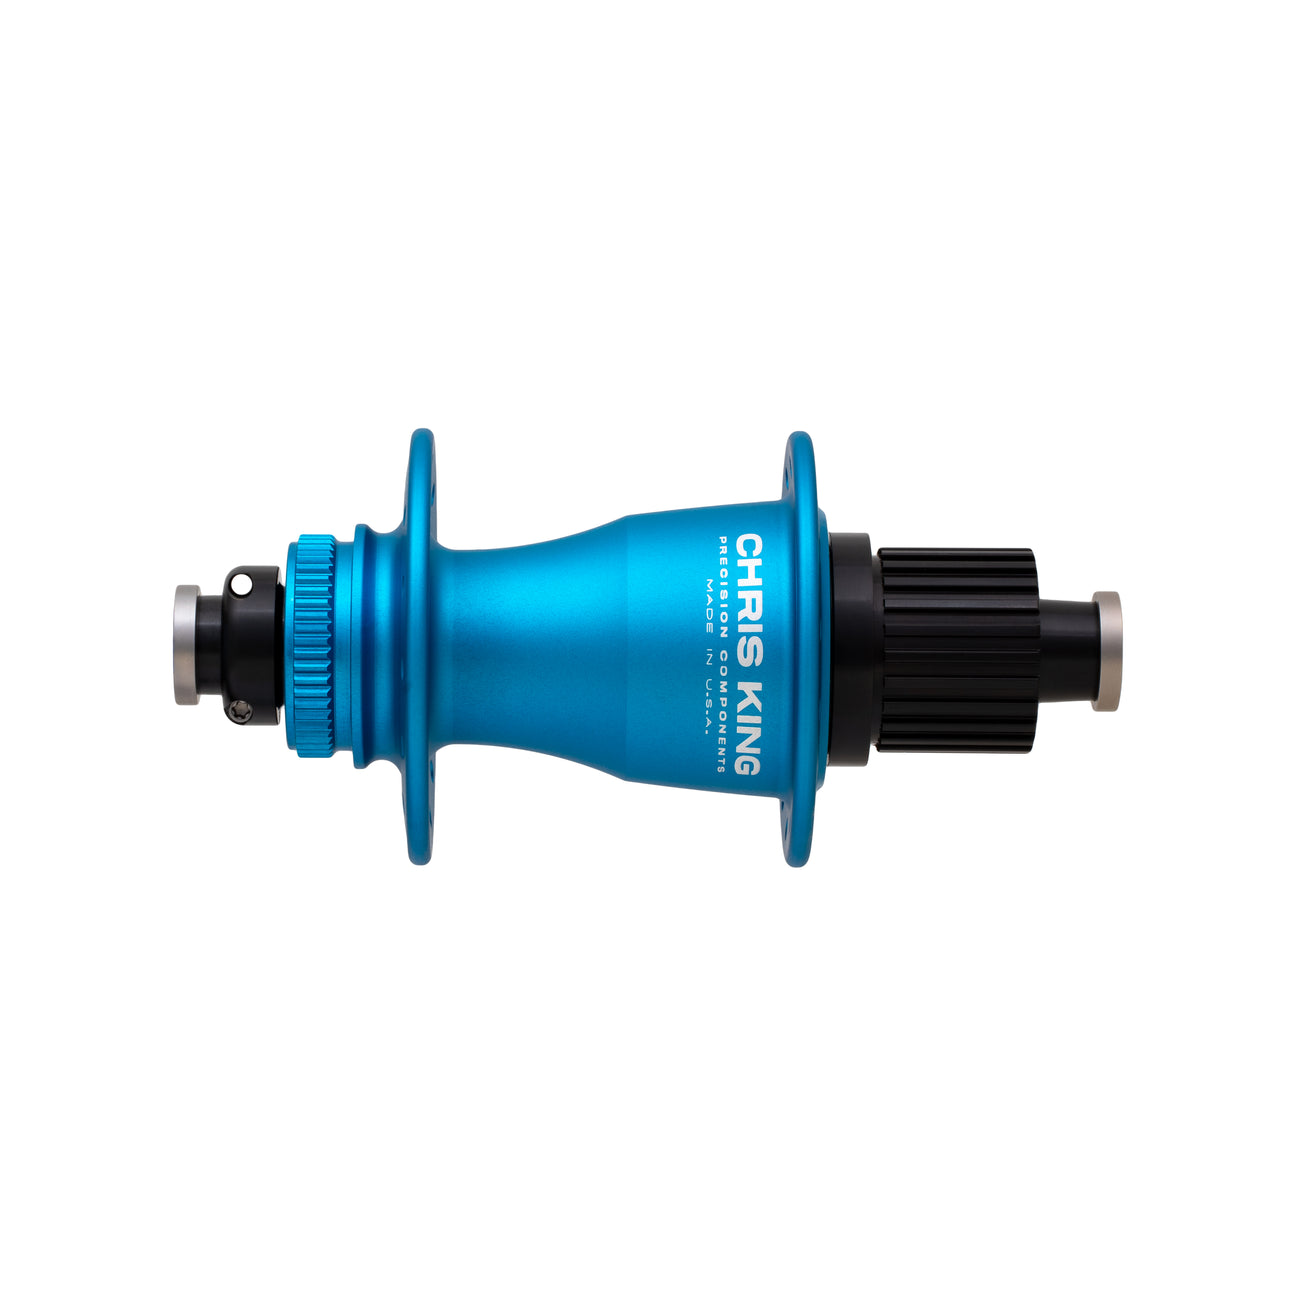 Chris king boost CL rear hub in matte turquoise